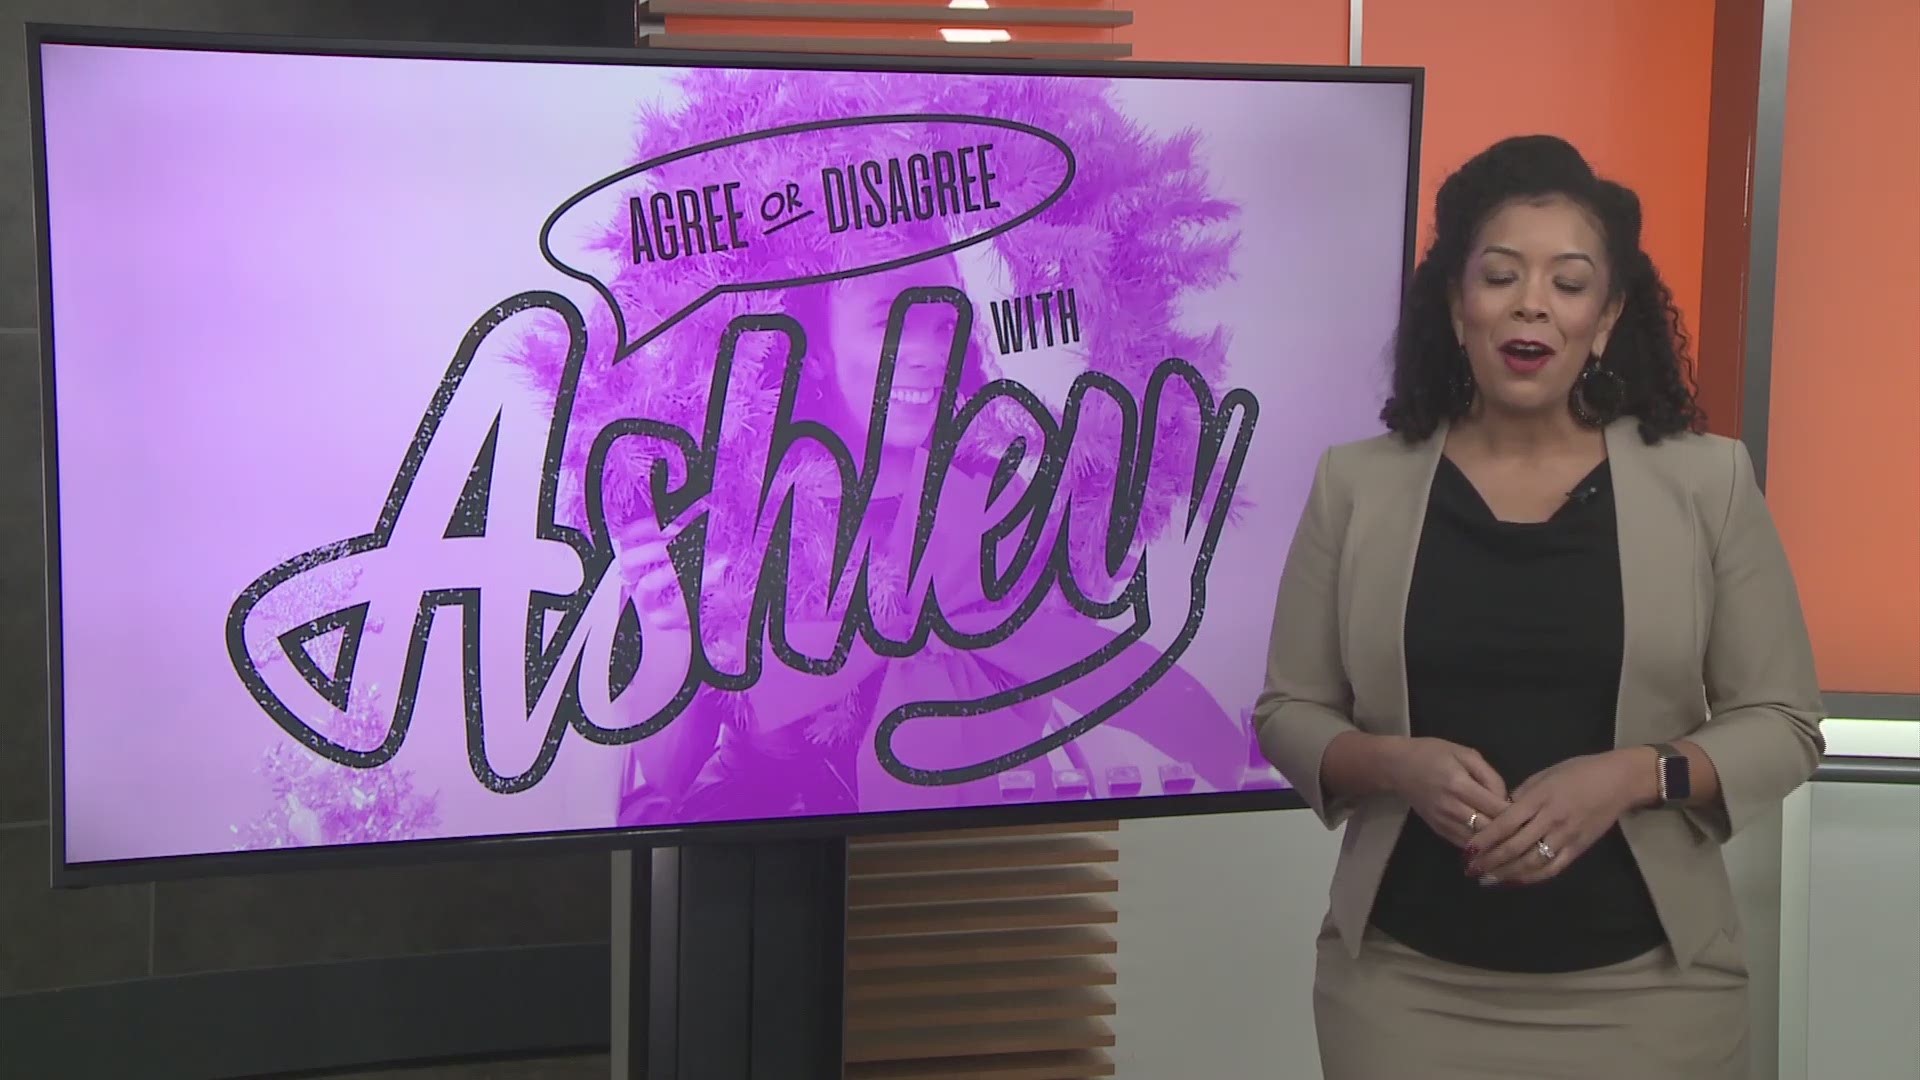 The holidays can be stressful. Ashley's here to help.